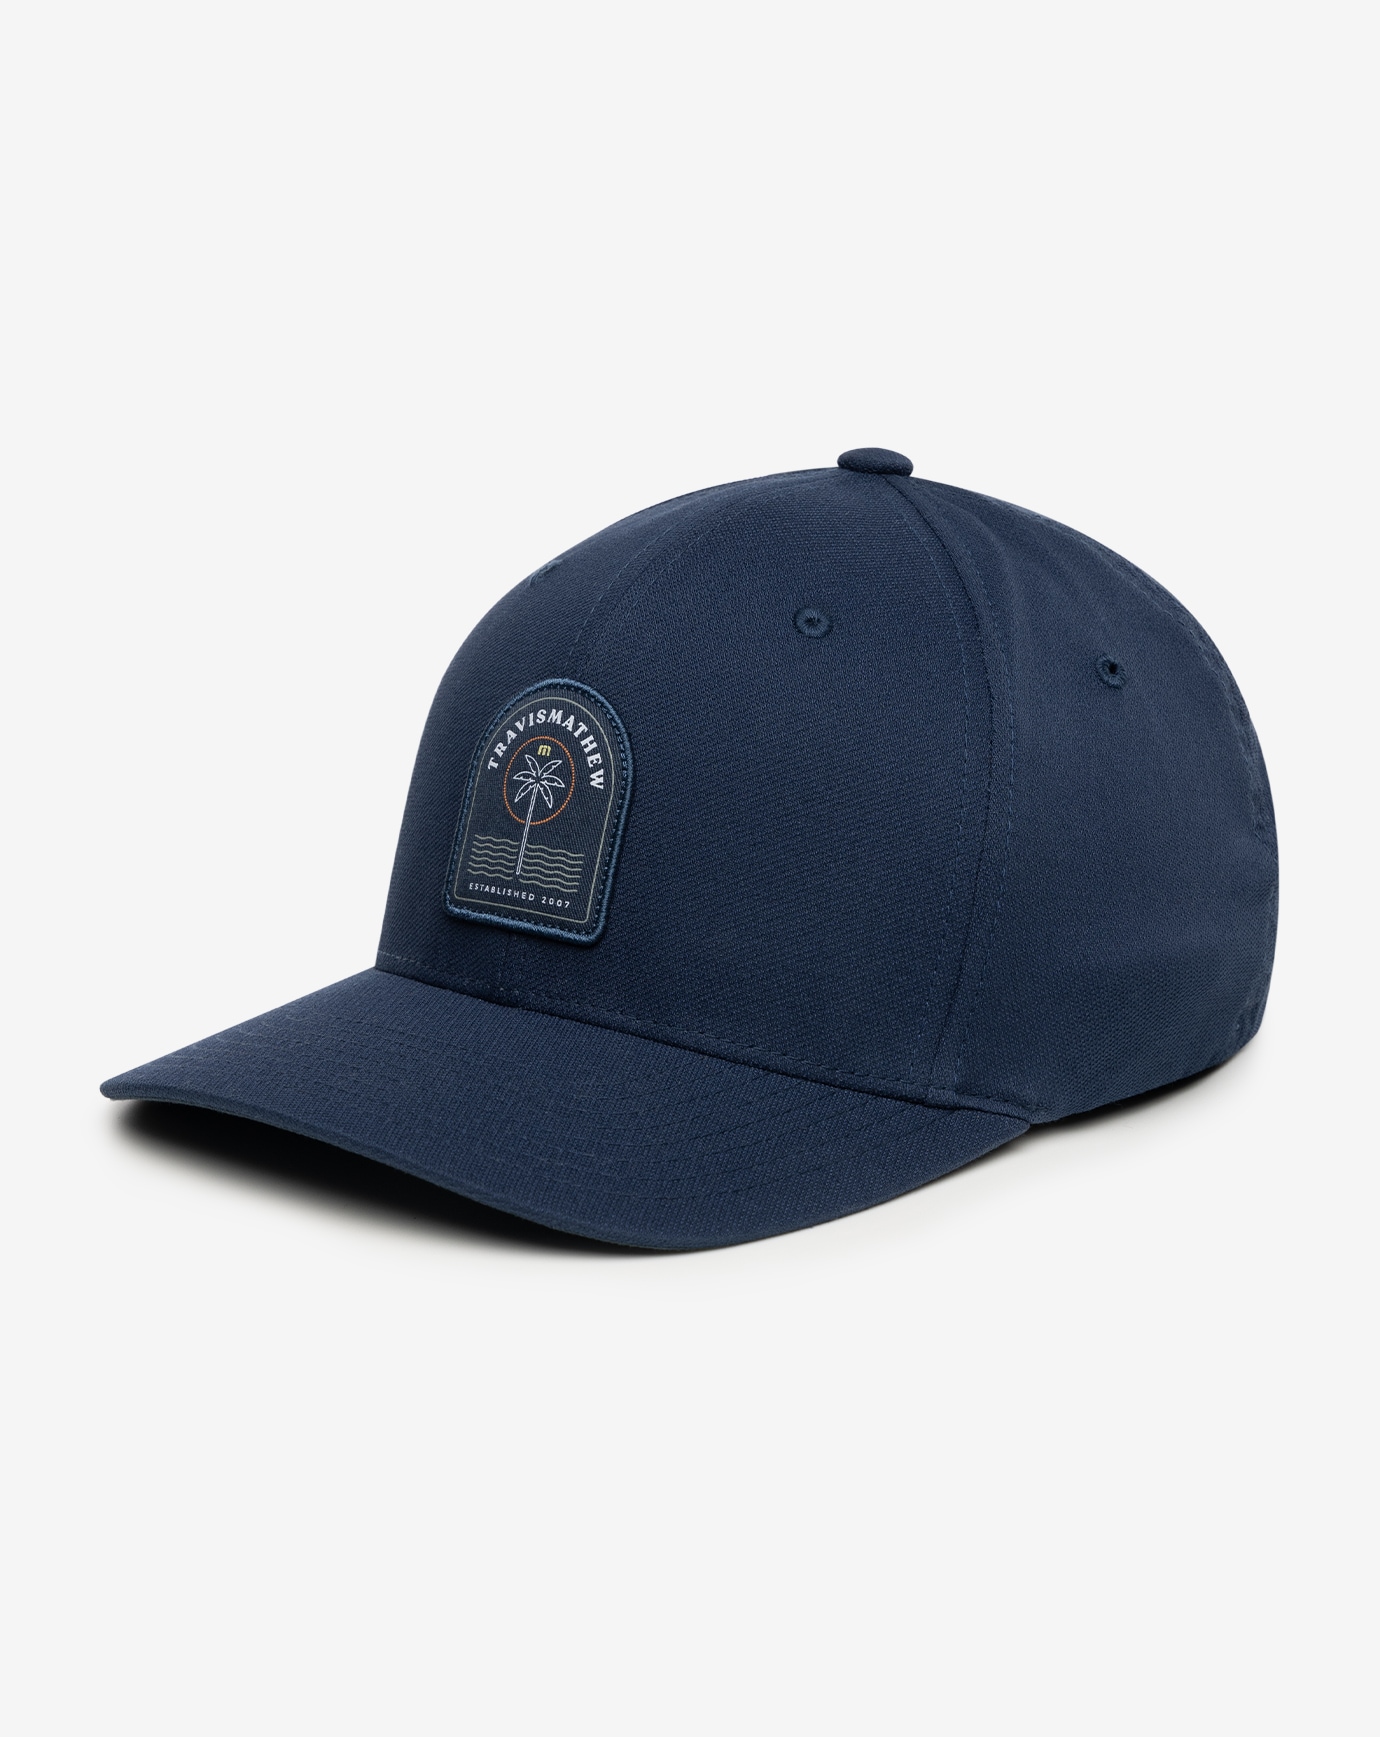 TEJATE FITTED HAT Image Thumbnail 3